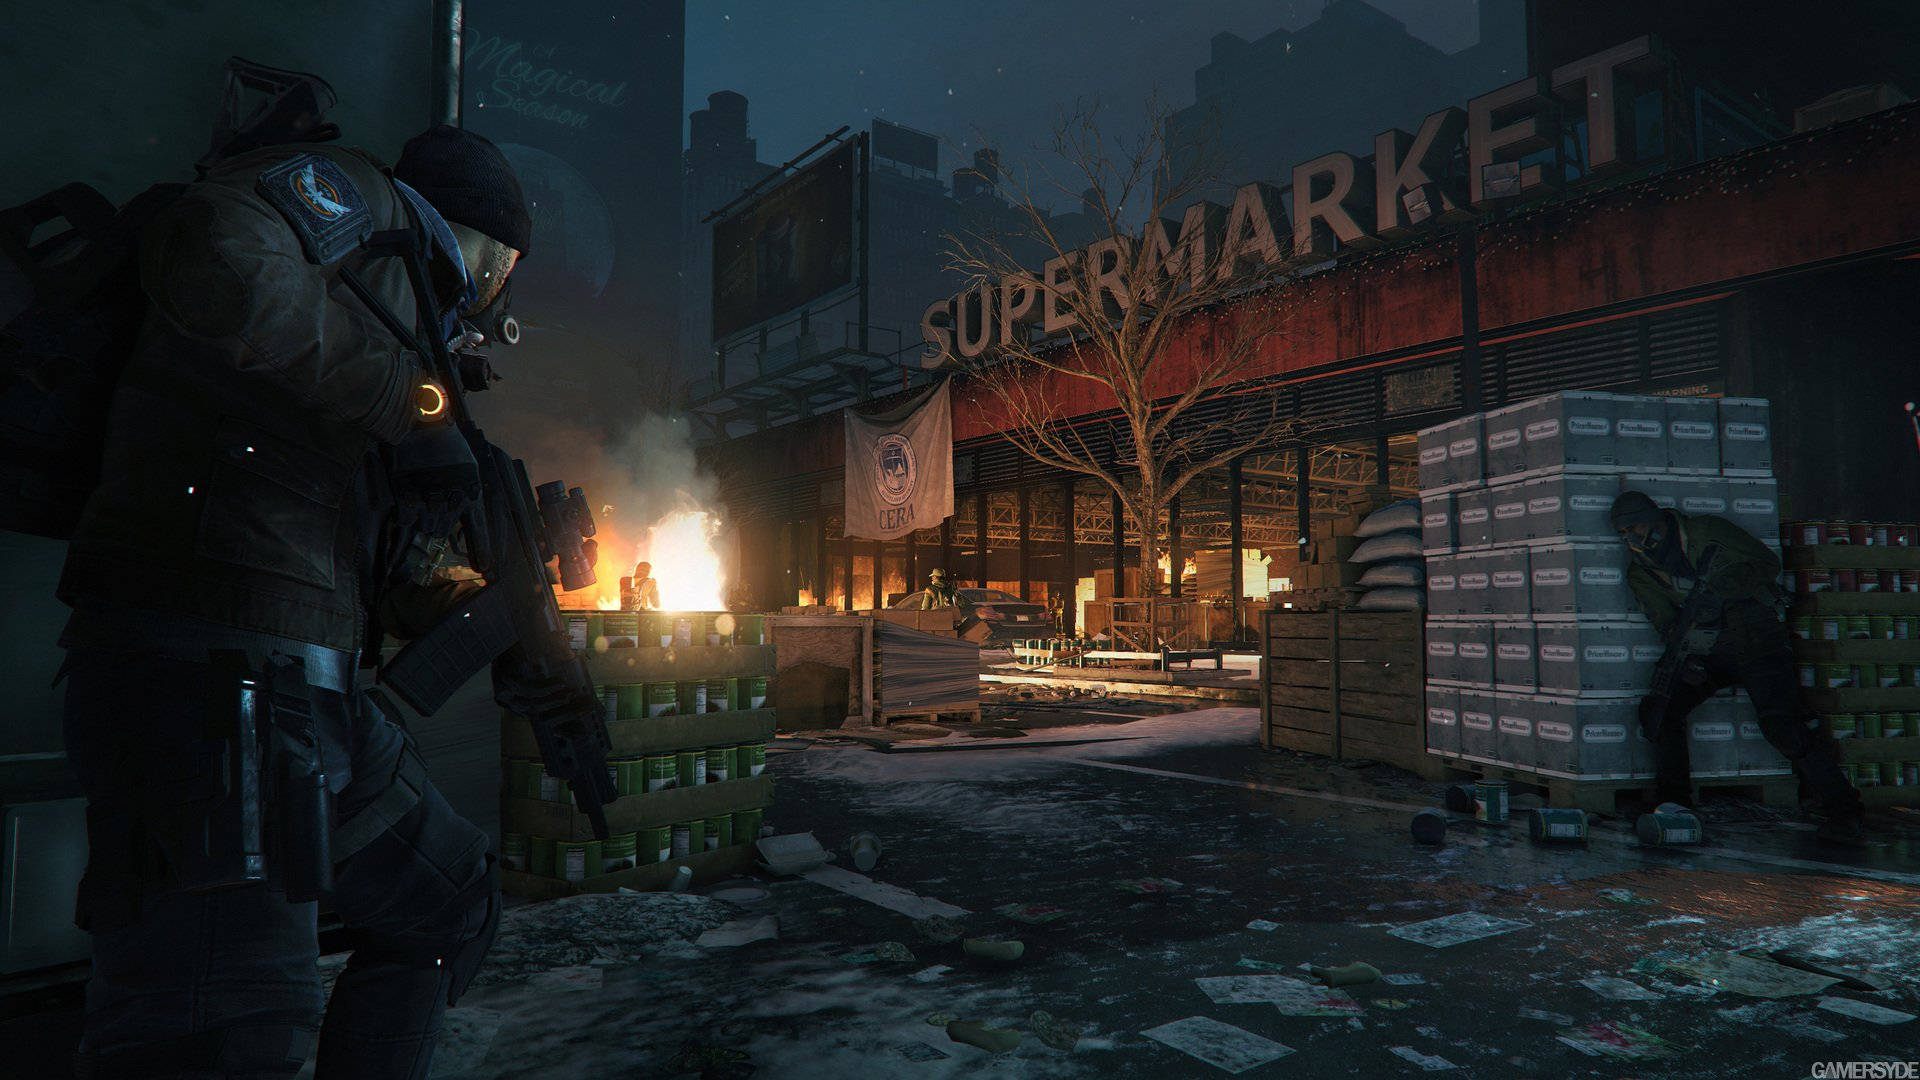 The Division Supermarket Background